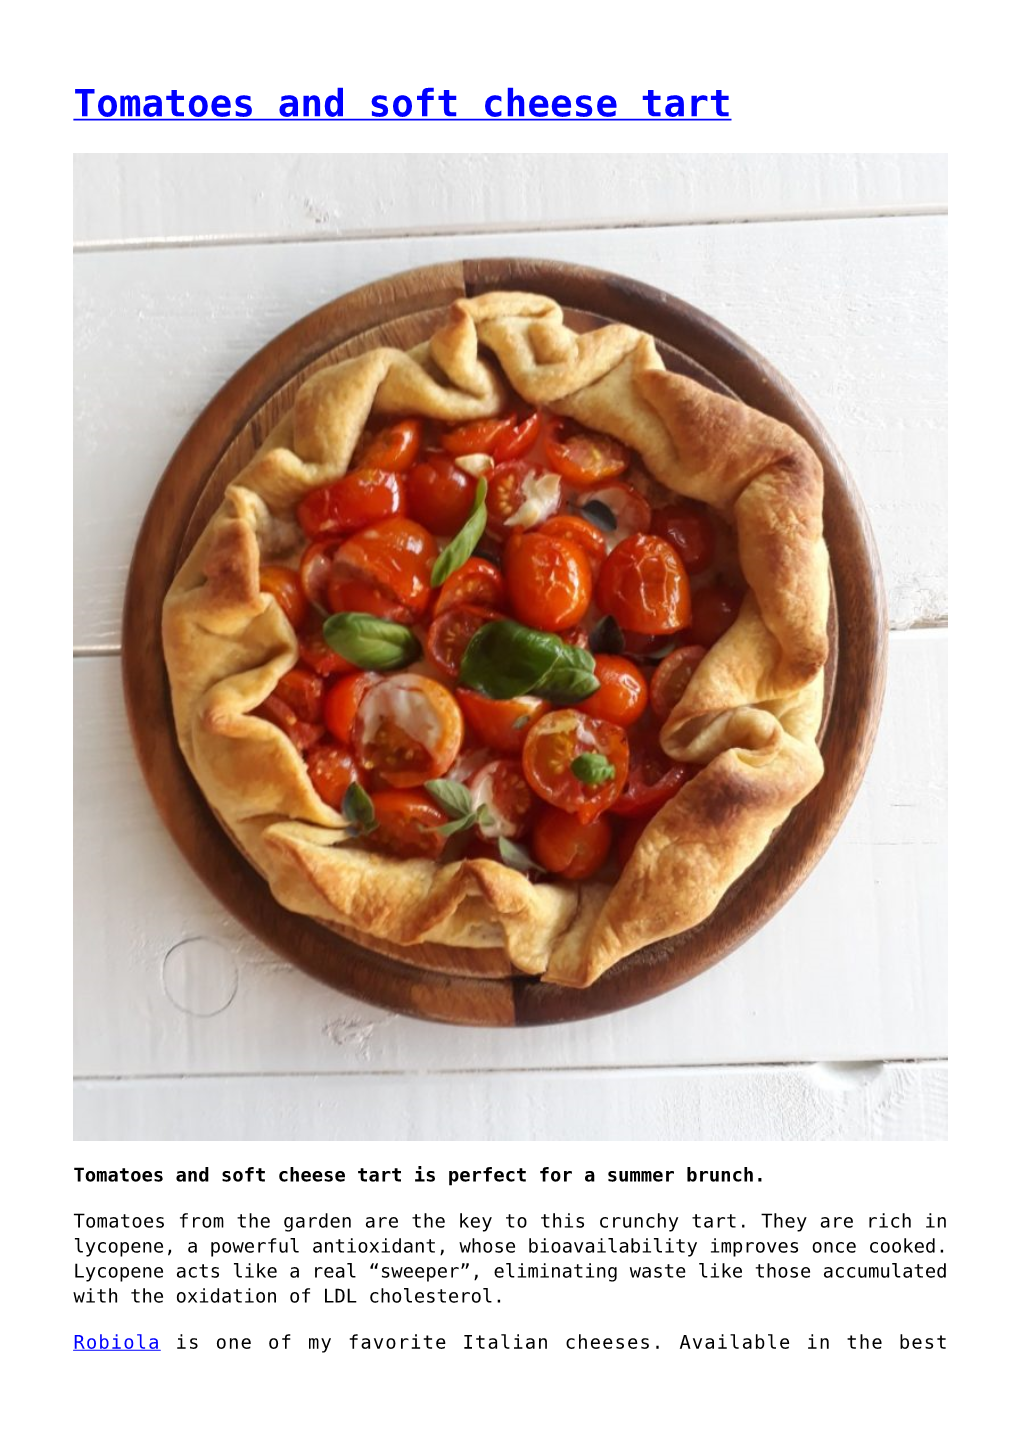 Tomatoes and Soft Cheese Tart